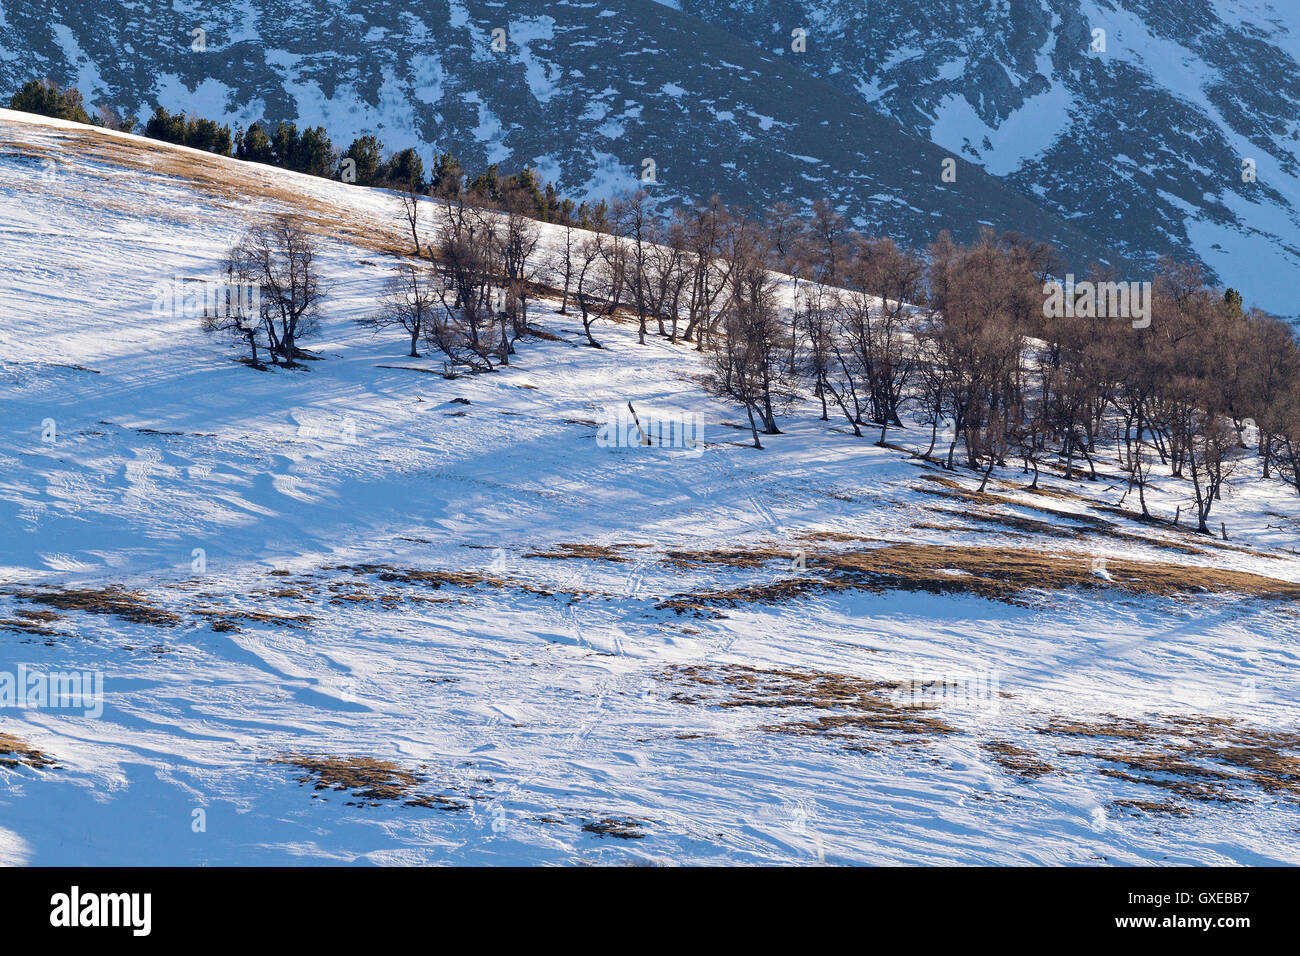 Seasonal nature winter image: mountain landscape with trees (black silhouettes) at a snowy mountain descent (slope) with a snow Stock Photo